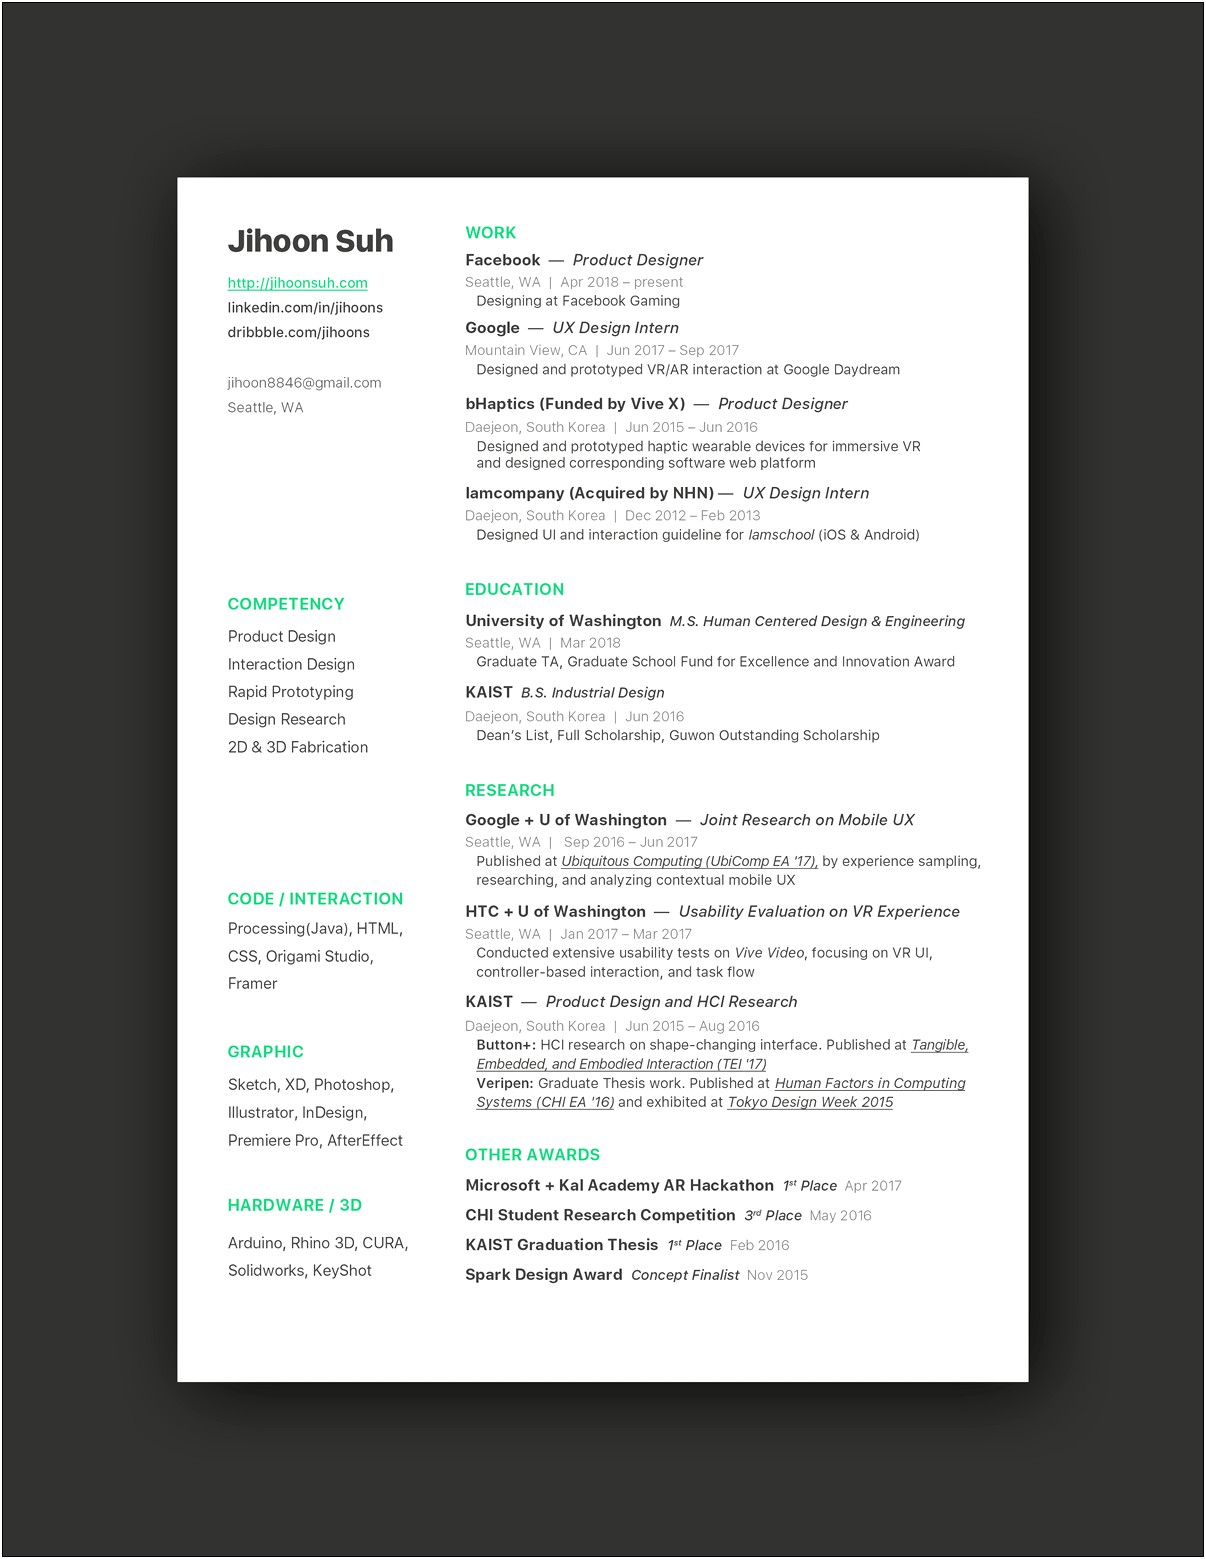 Objective For Light Industrial Resume